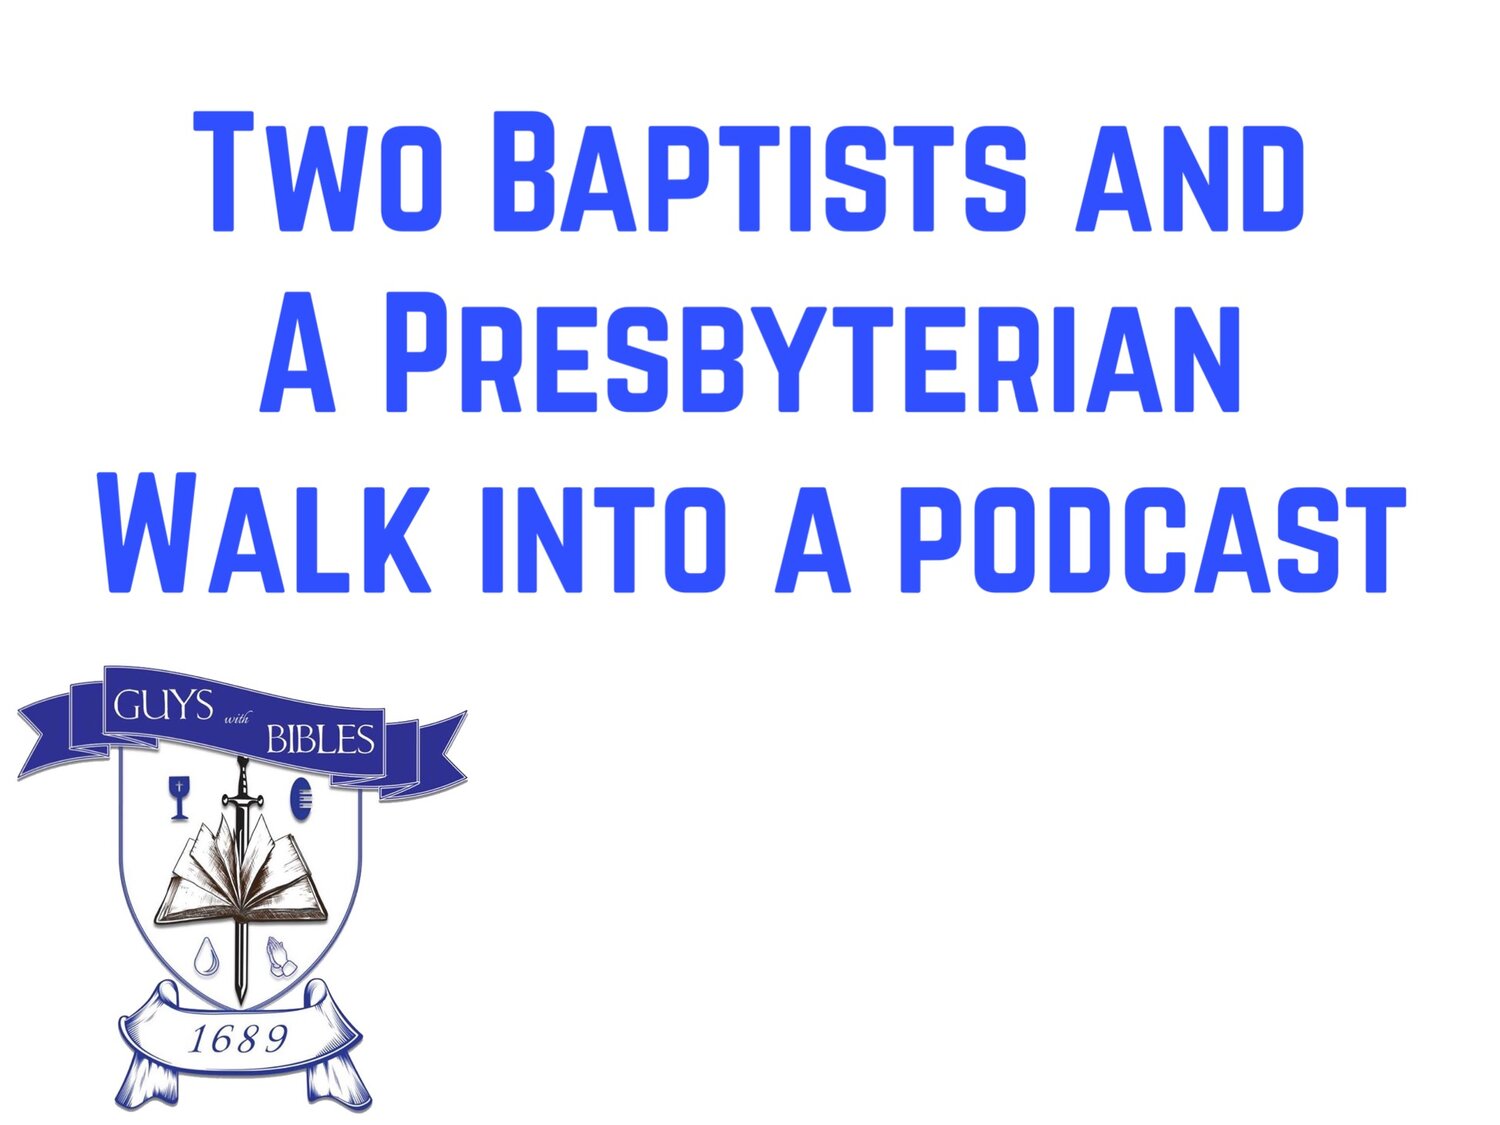 Two Baptists and a Presbyterian Walk into a Podcast